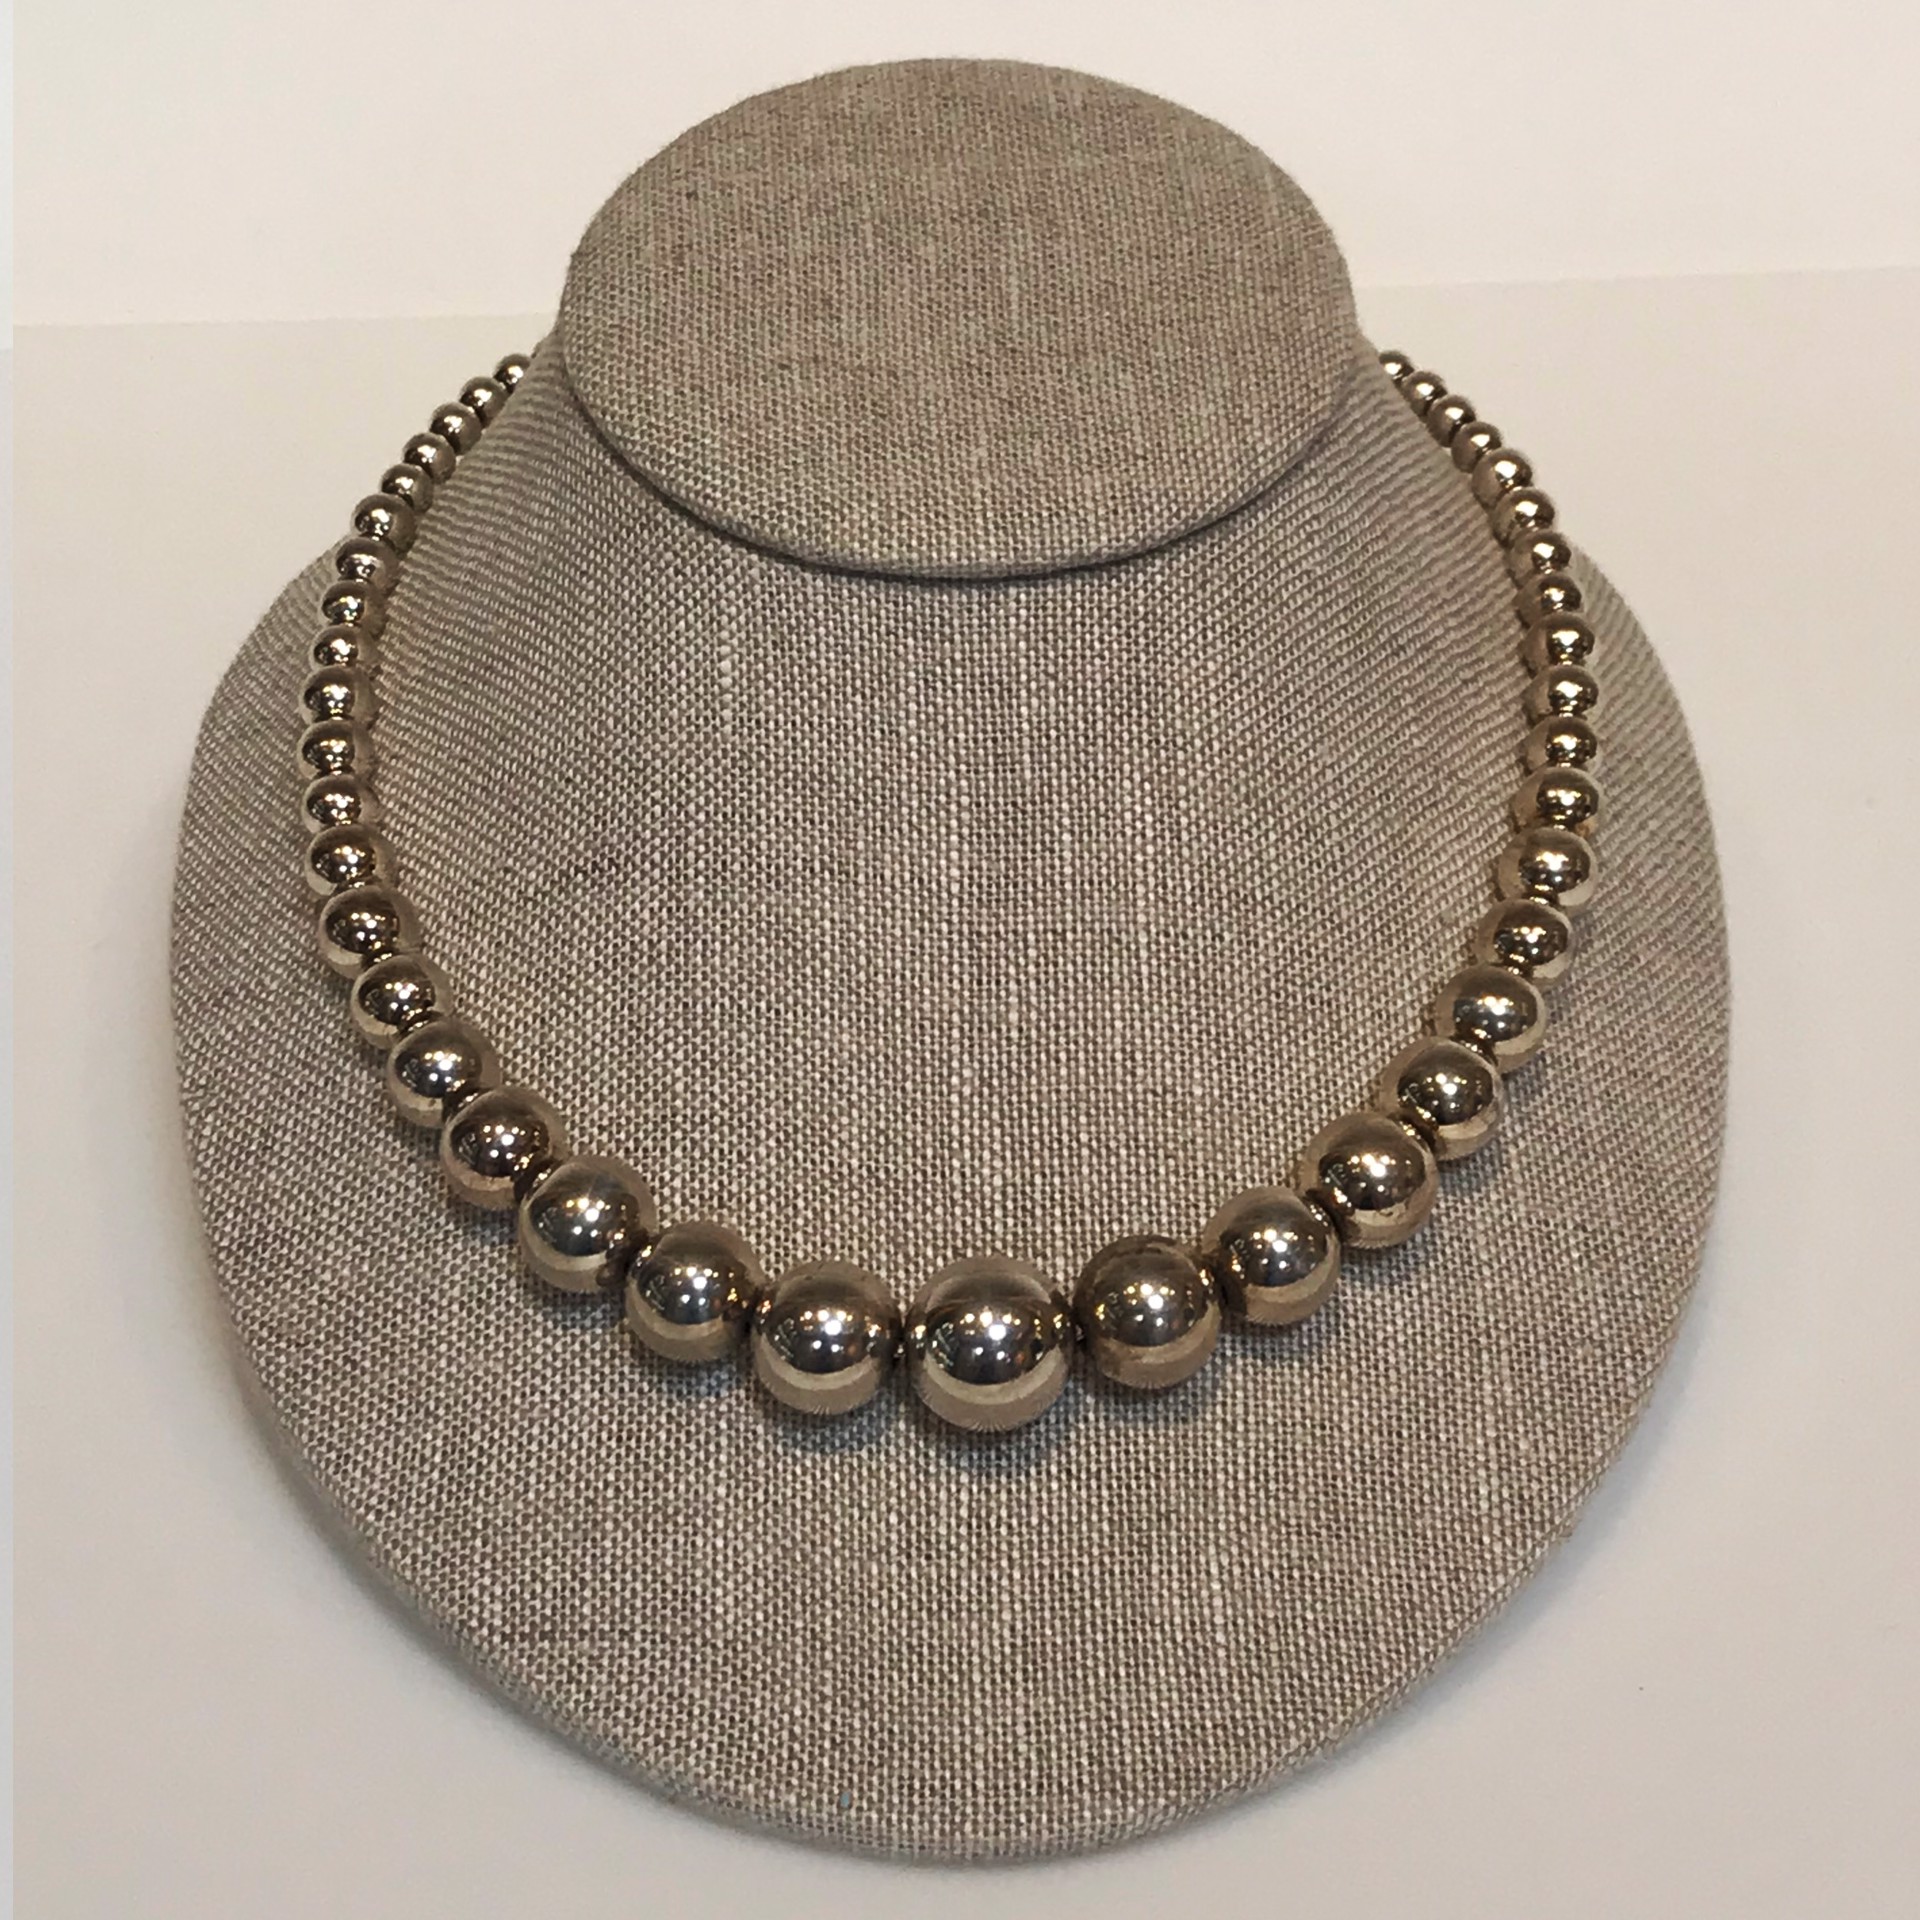 17" Sterling Silver Beaded Necklace - 6mm by Suzanne Woodworth